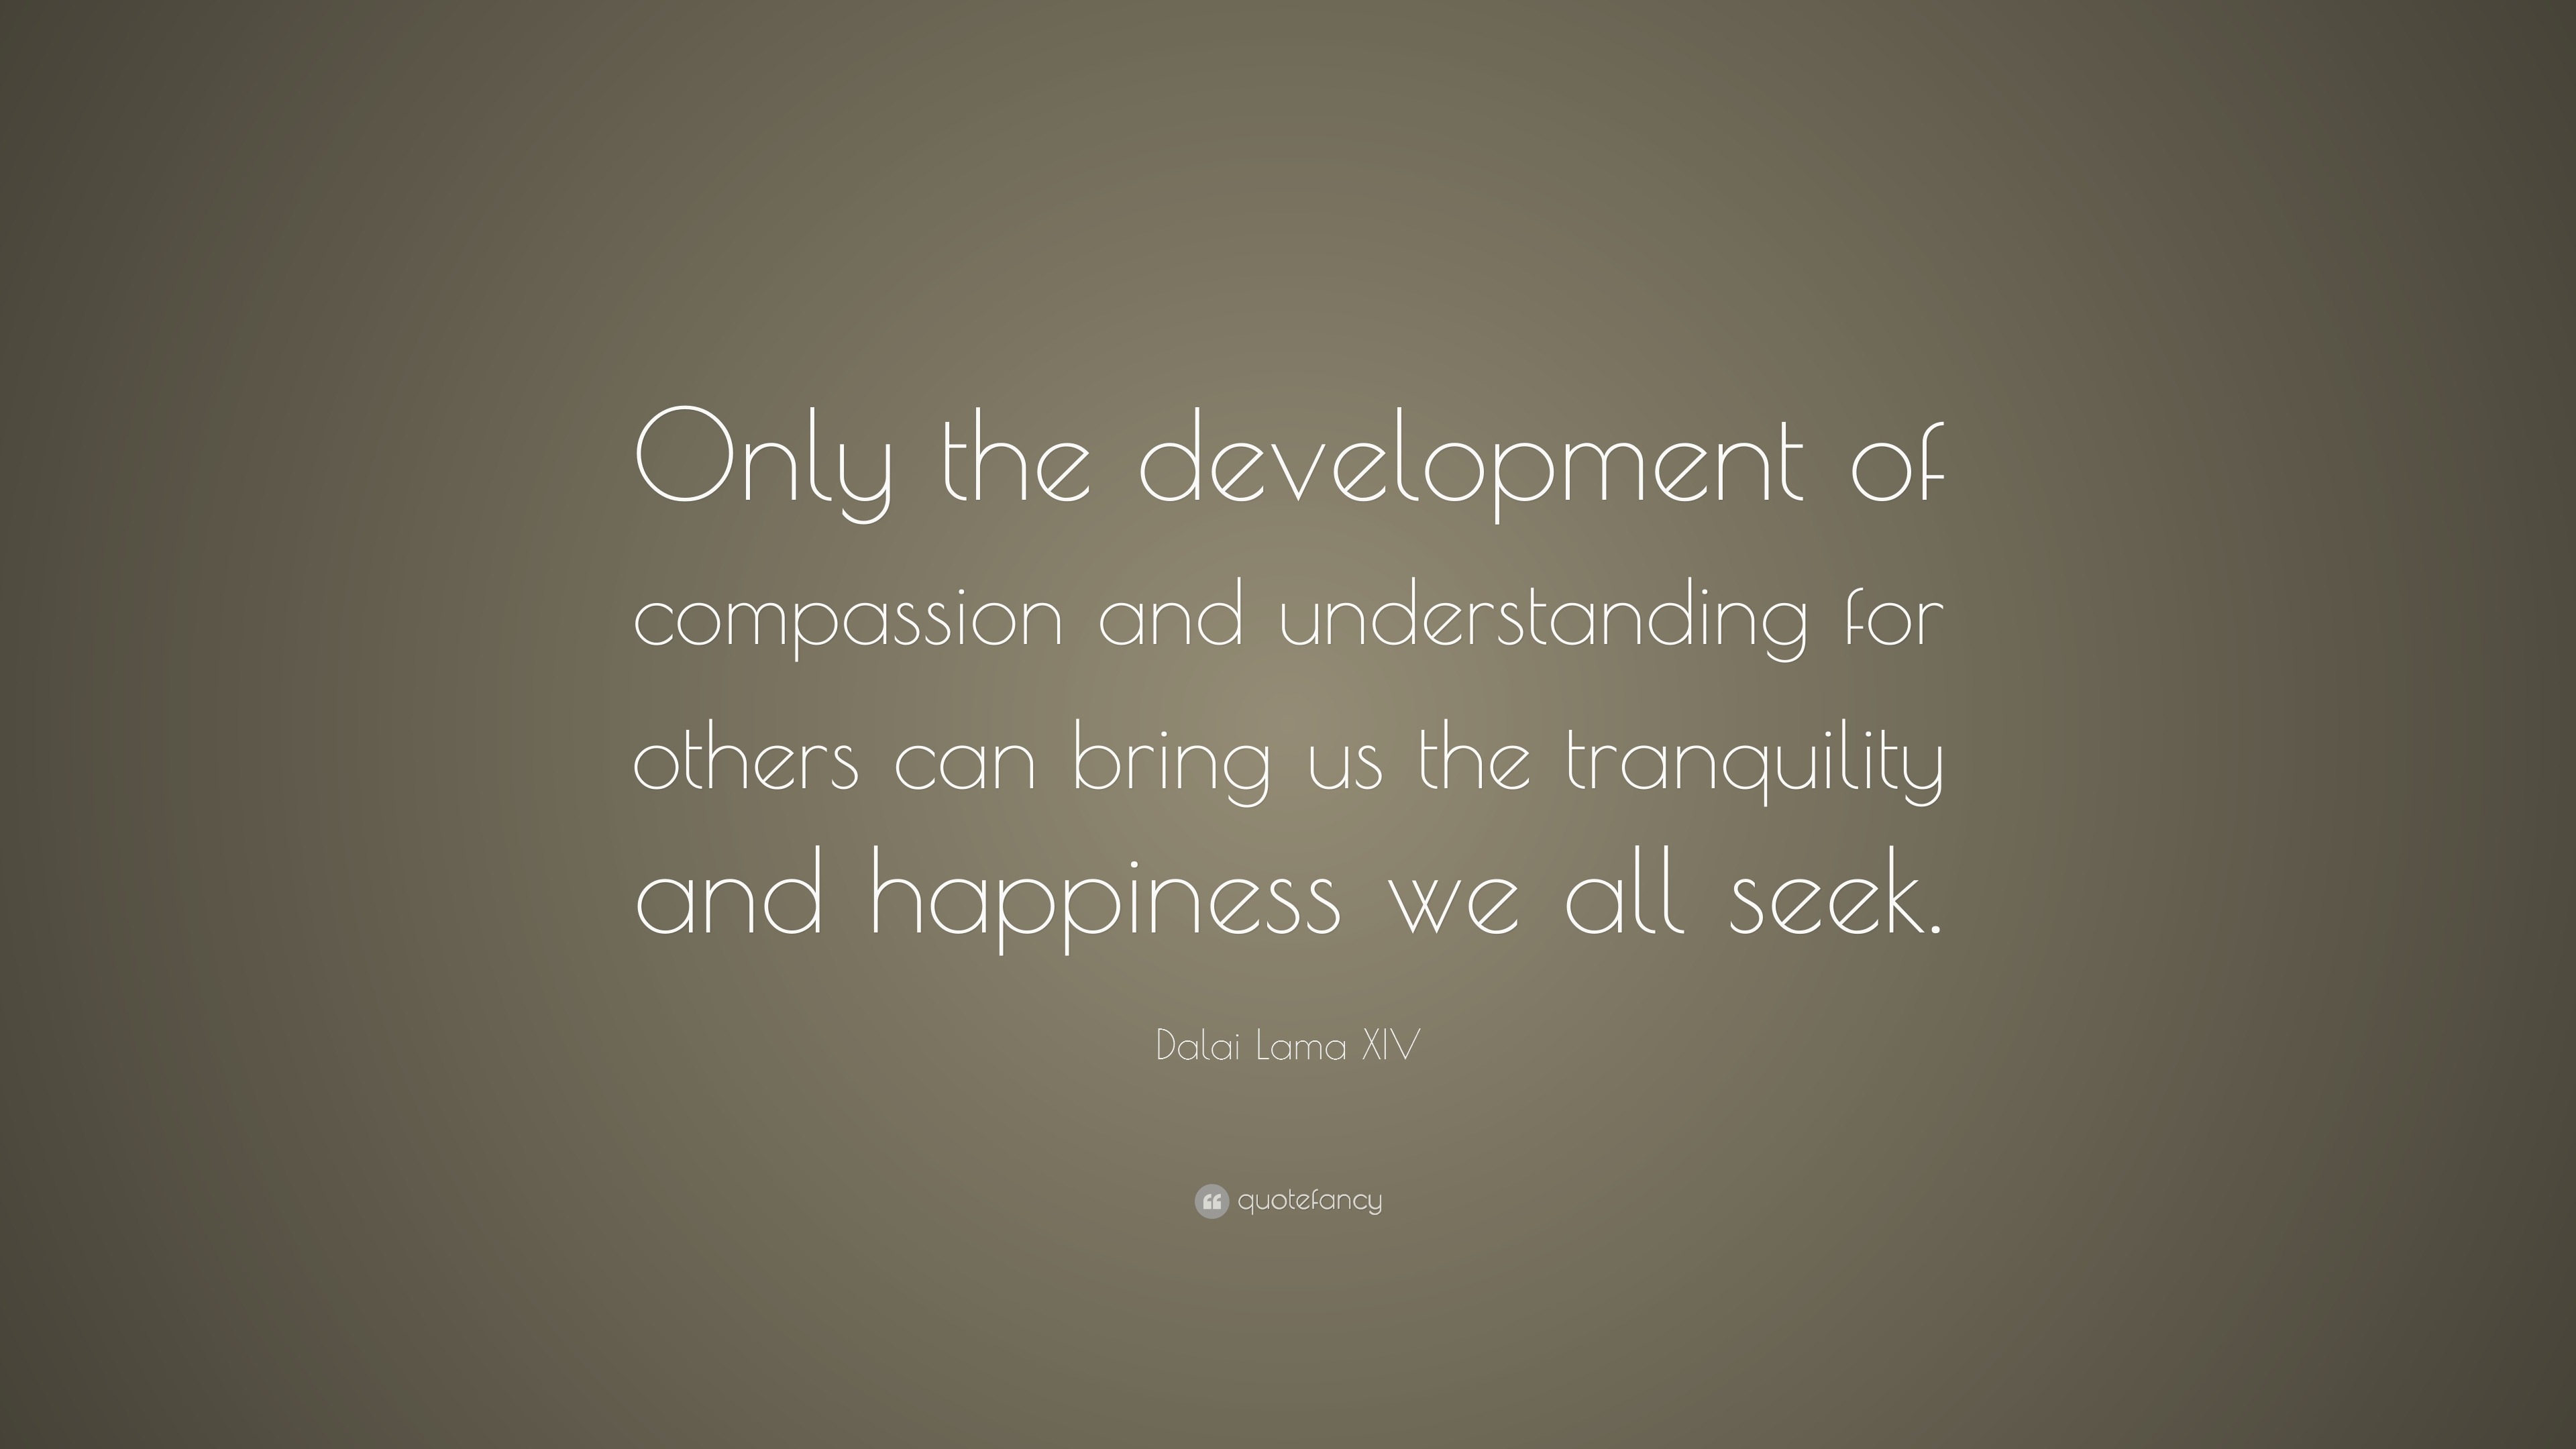 Dalai Lama XIV Quote: “Only the development of compassion and ...